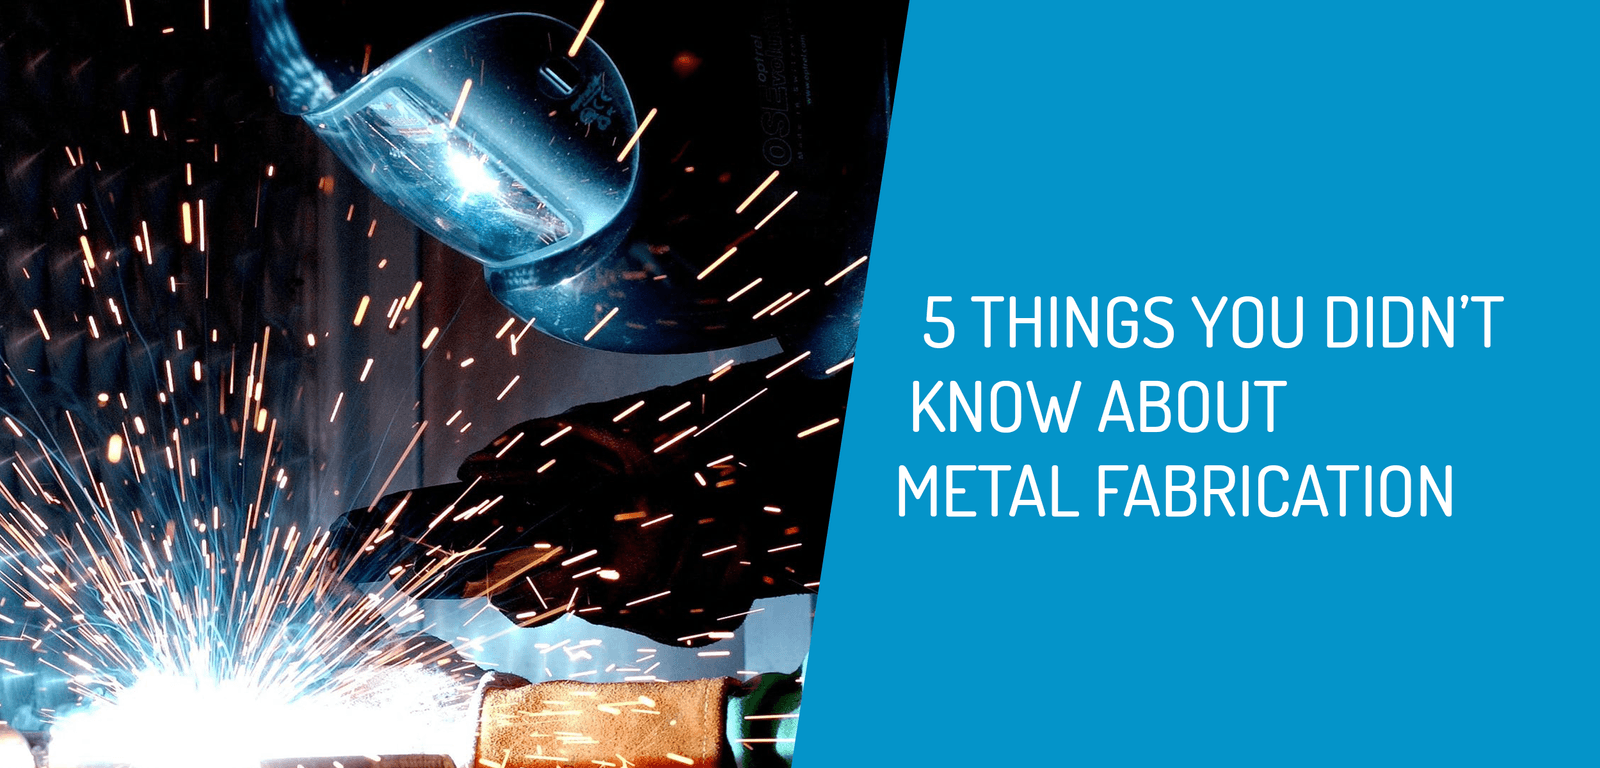 5 Things You Didn’t Know About Metal Fabrication